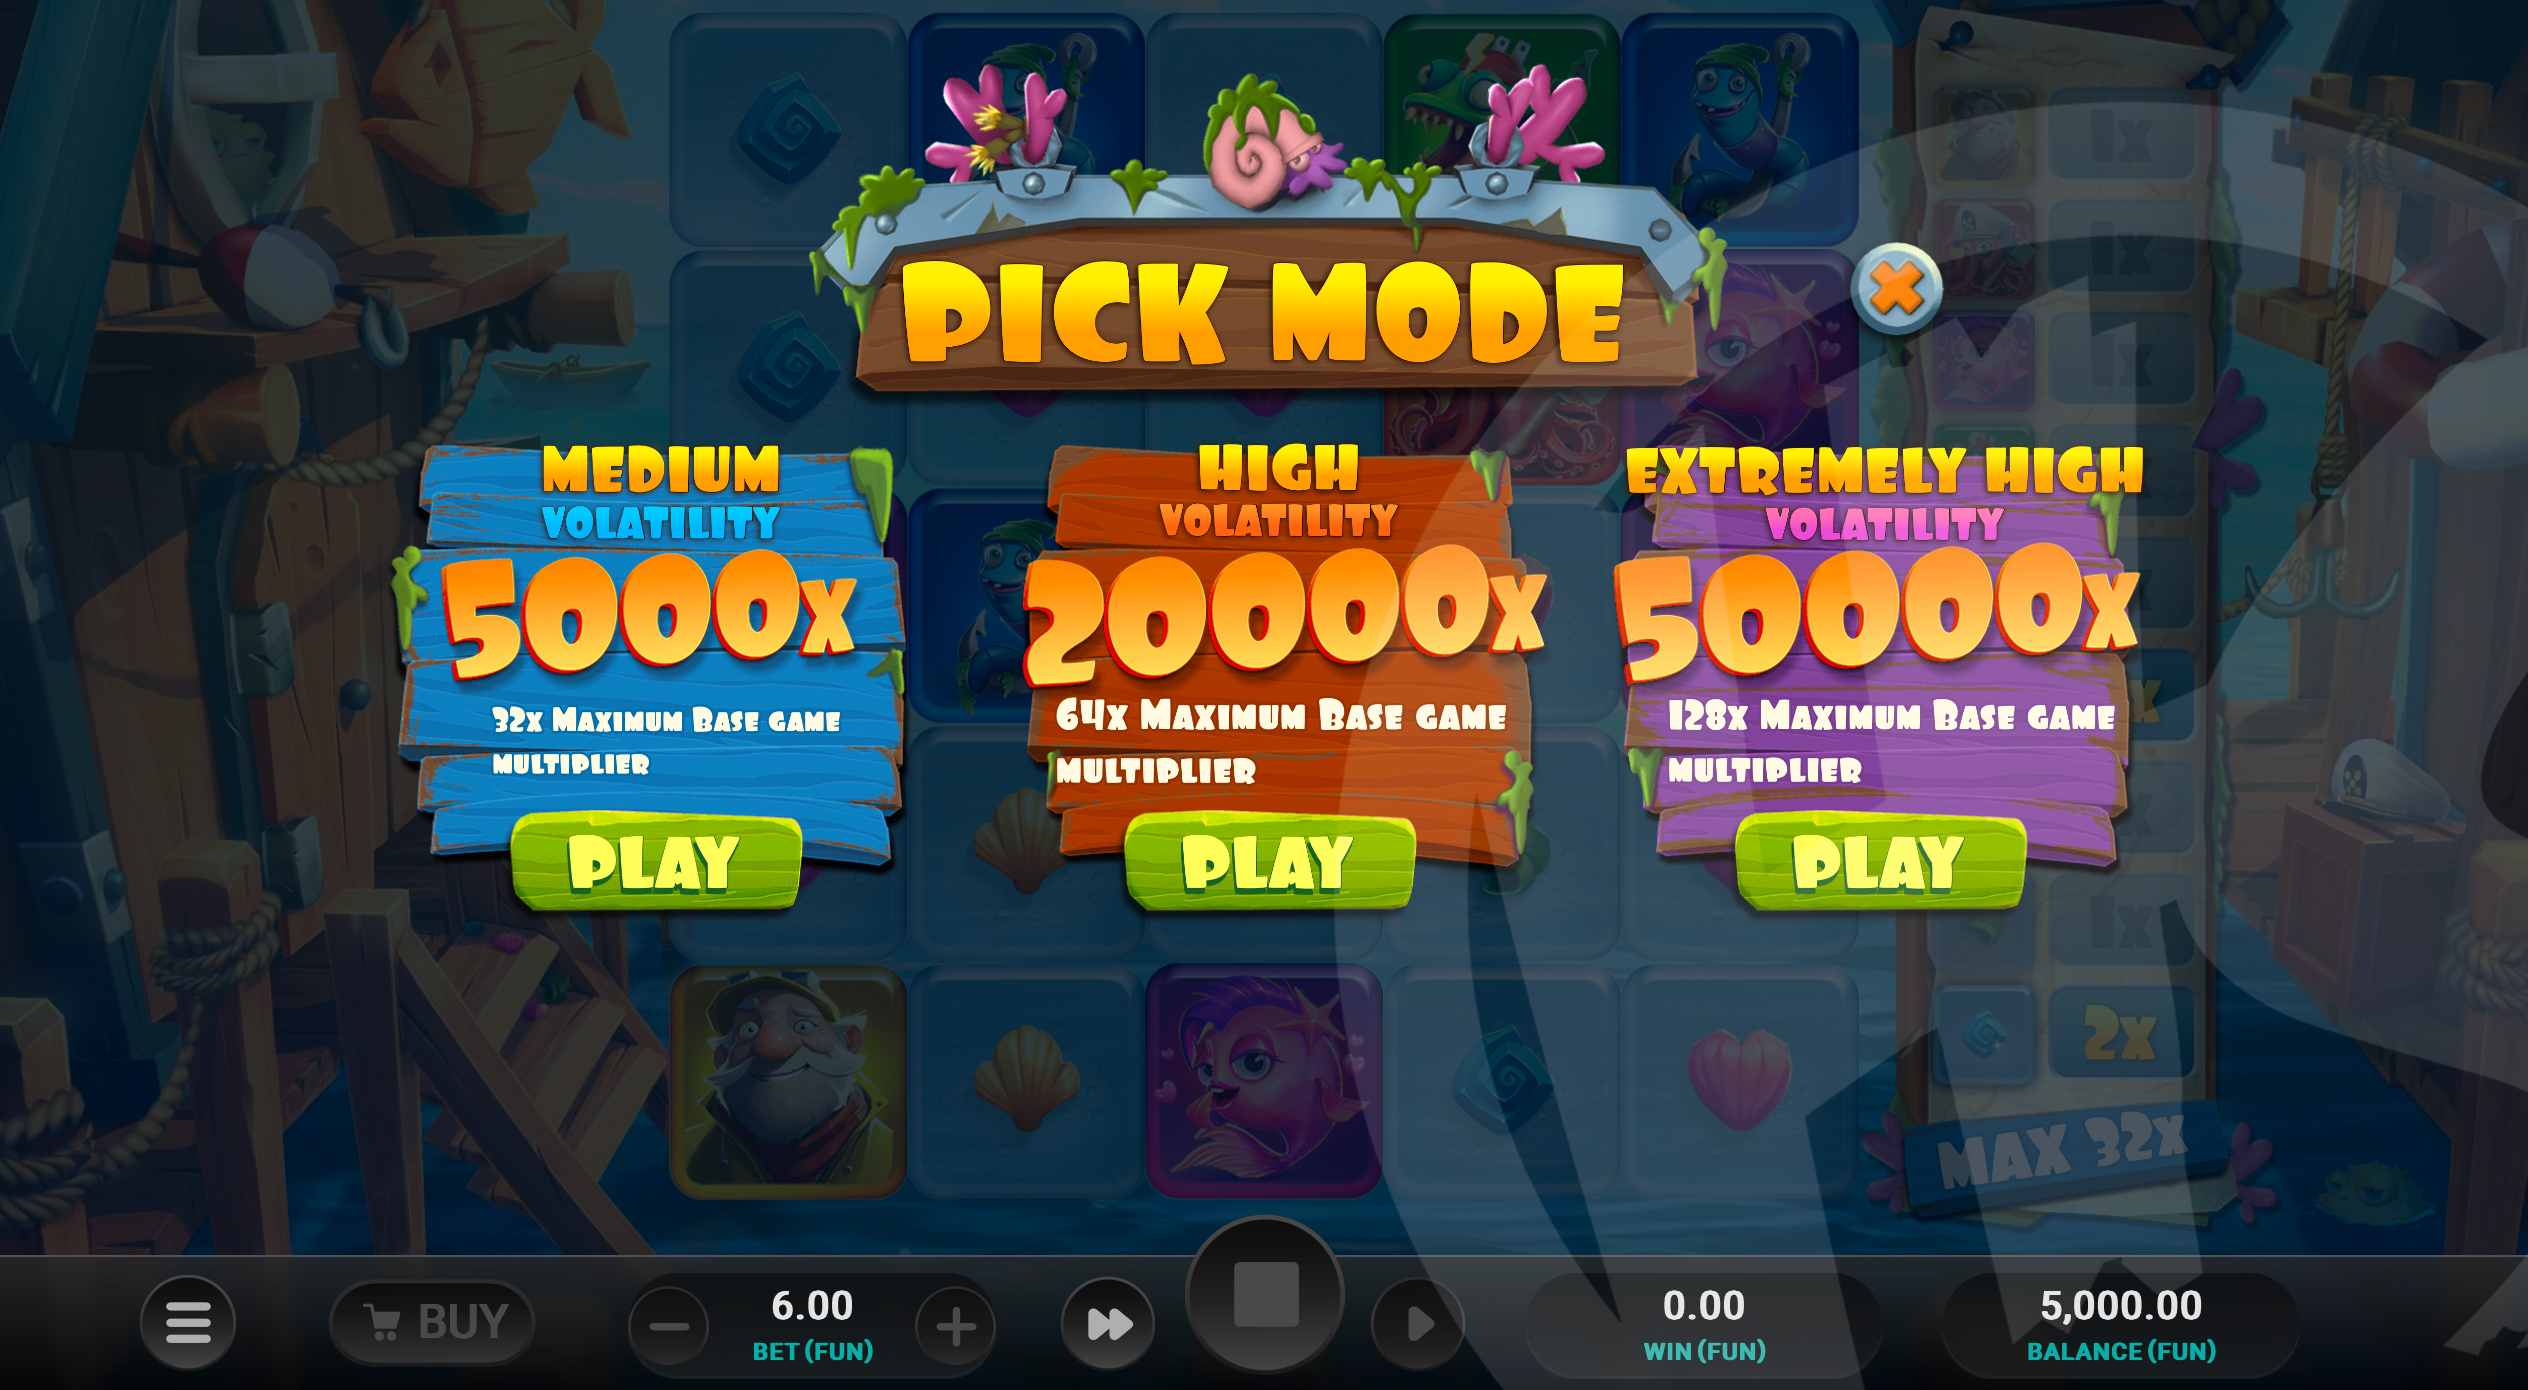 Choose From 1 of 3 Game Modes With Different Characteristics